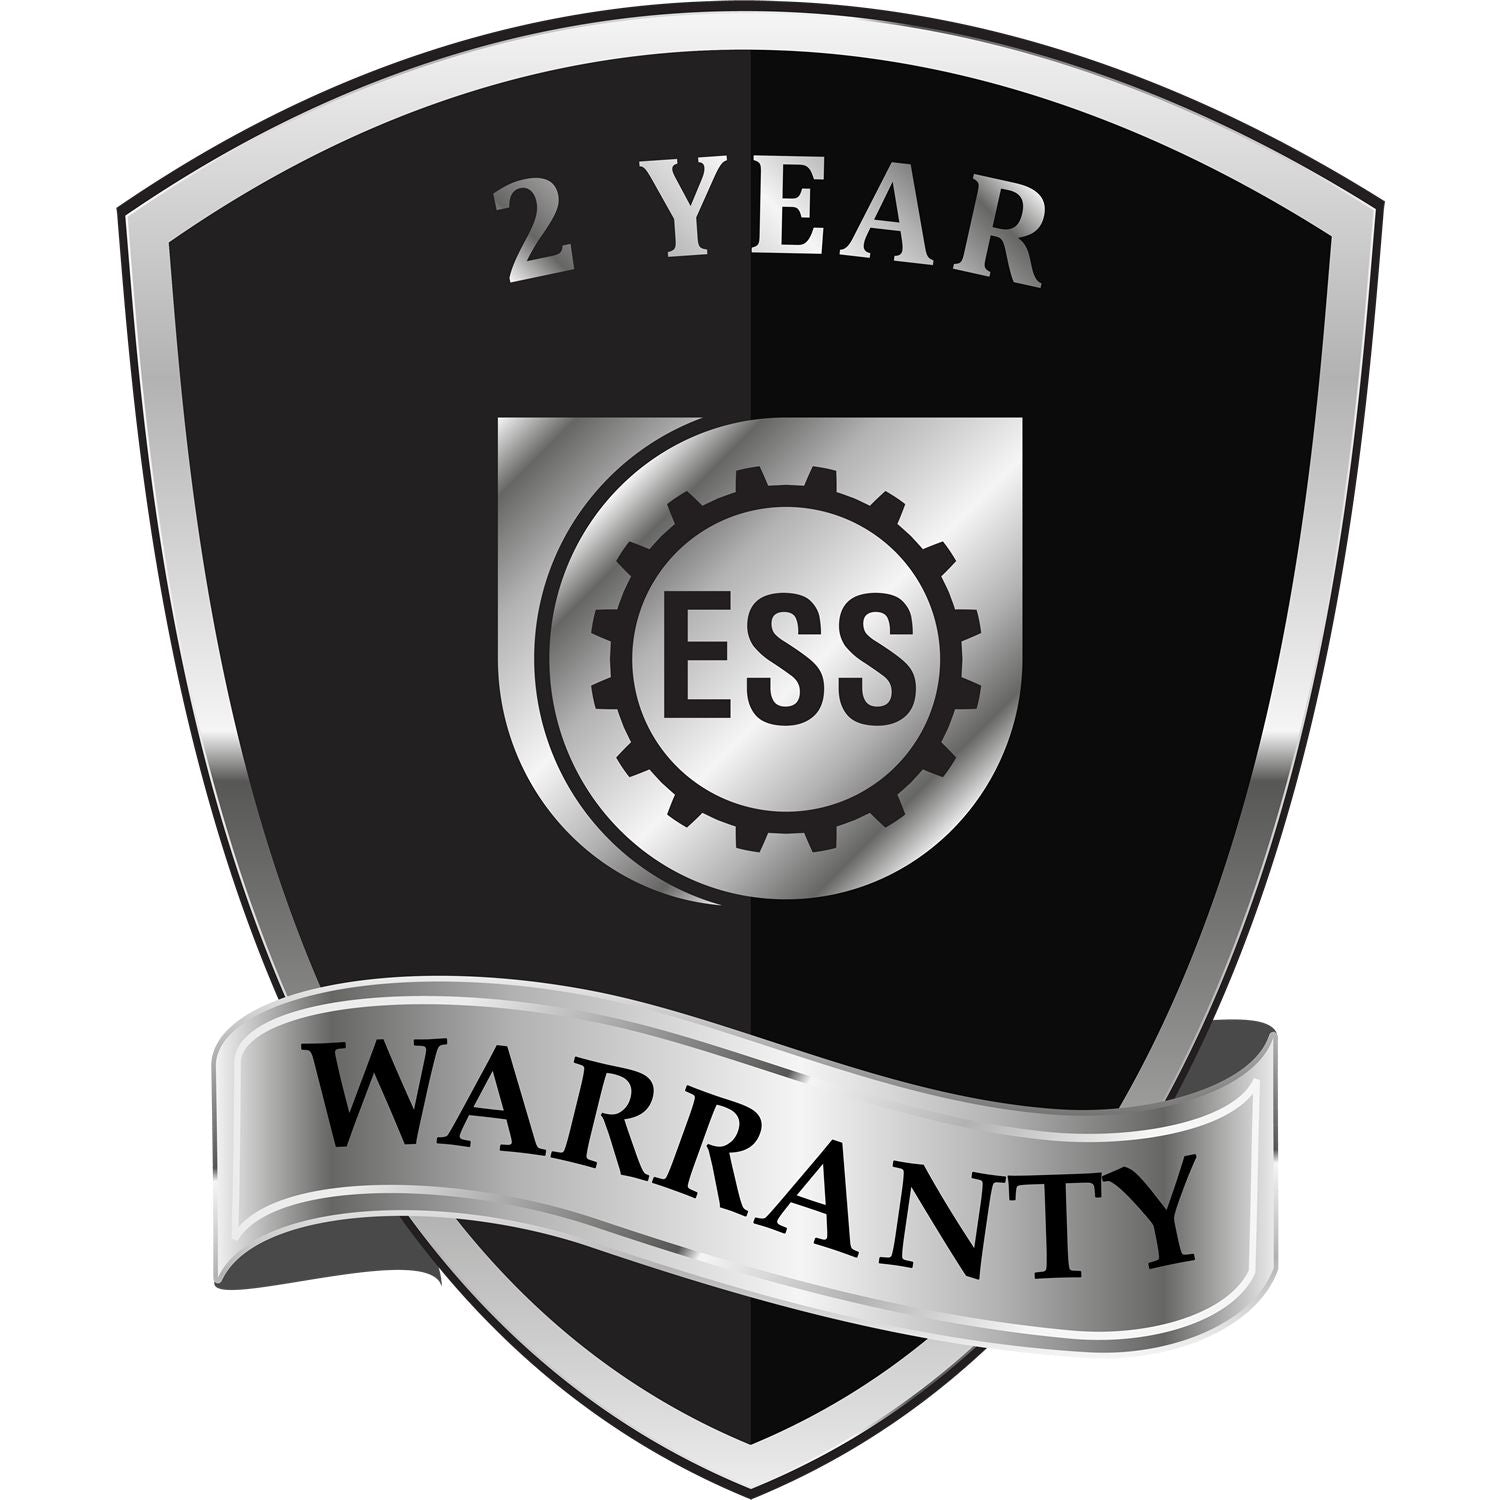 A badge or emblem showing a warranty icon for the State of Puerto Rico Extended Long Reach Engineer Seal